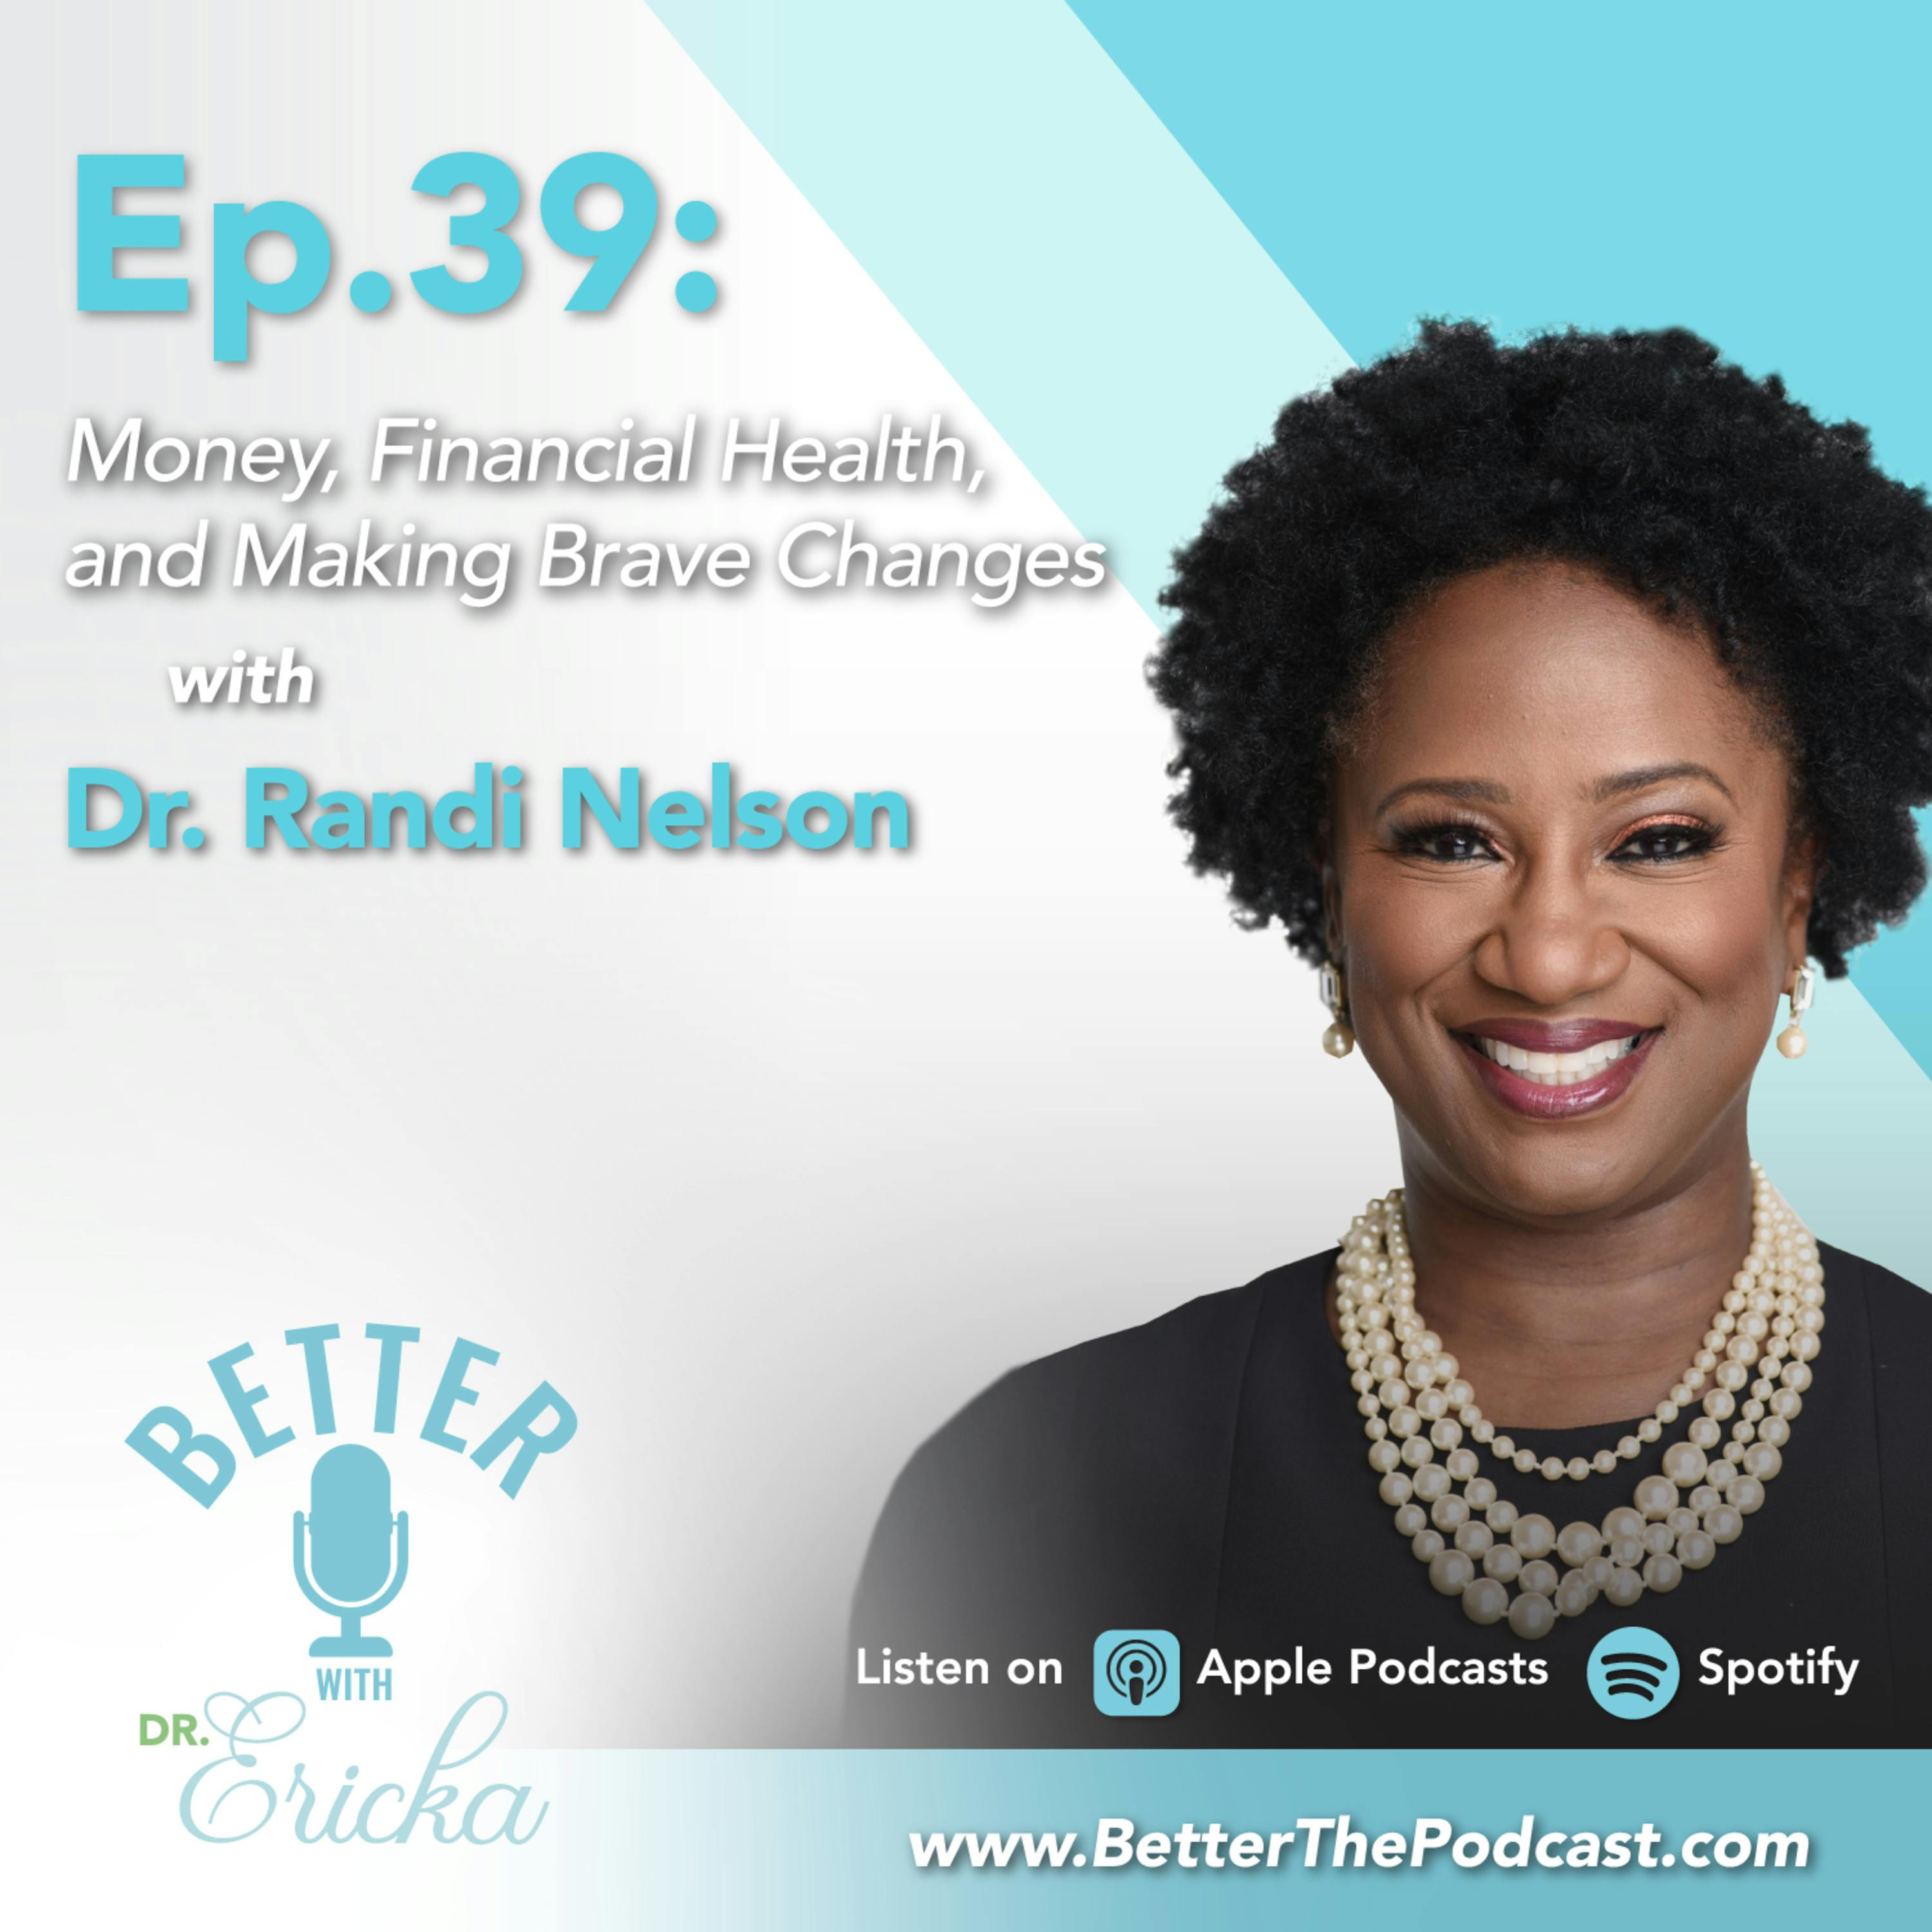 Money, Financial Health, and Making Brave Changes with Dr. Randi Nelson